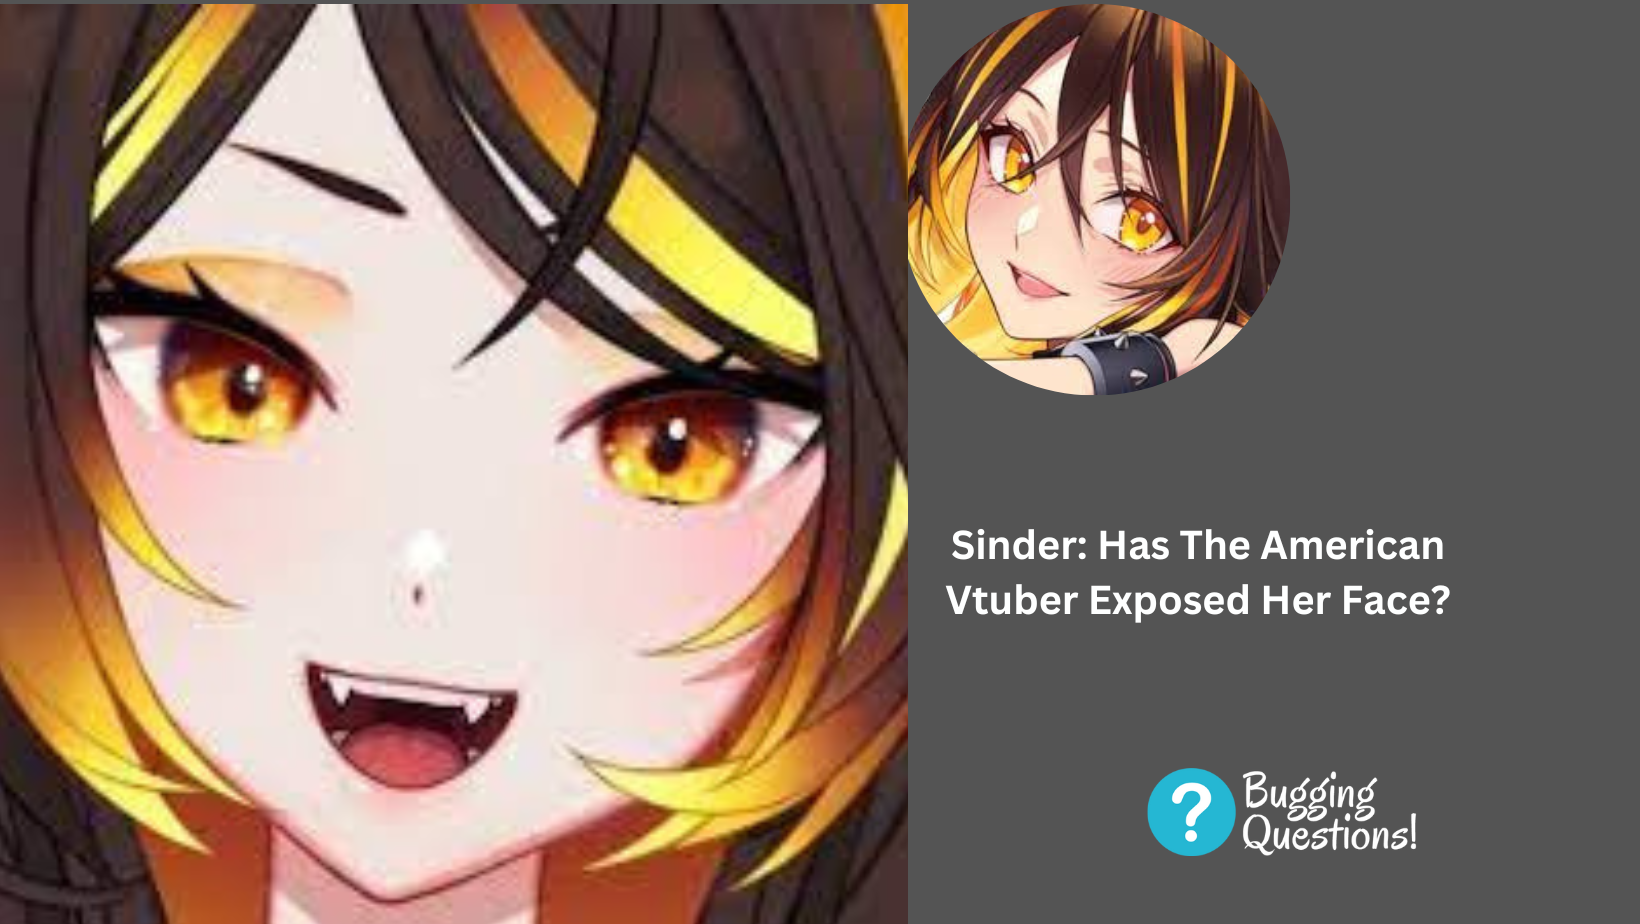 Sinder: Has The American Vtuber Exposed Her Face?